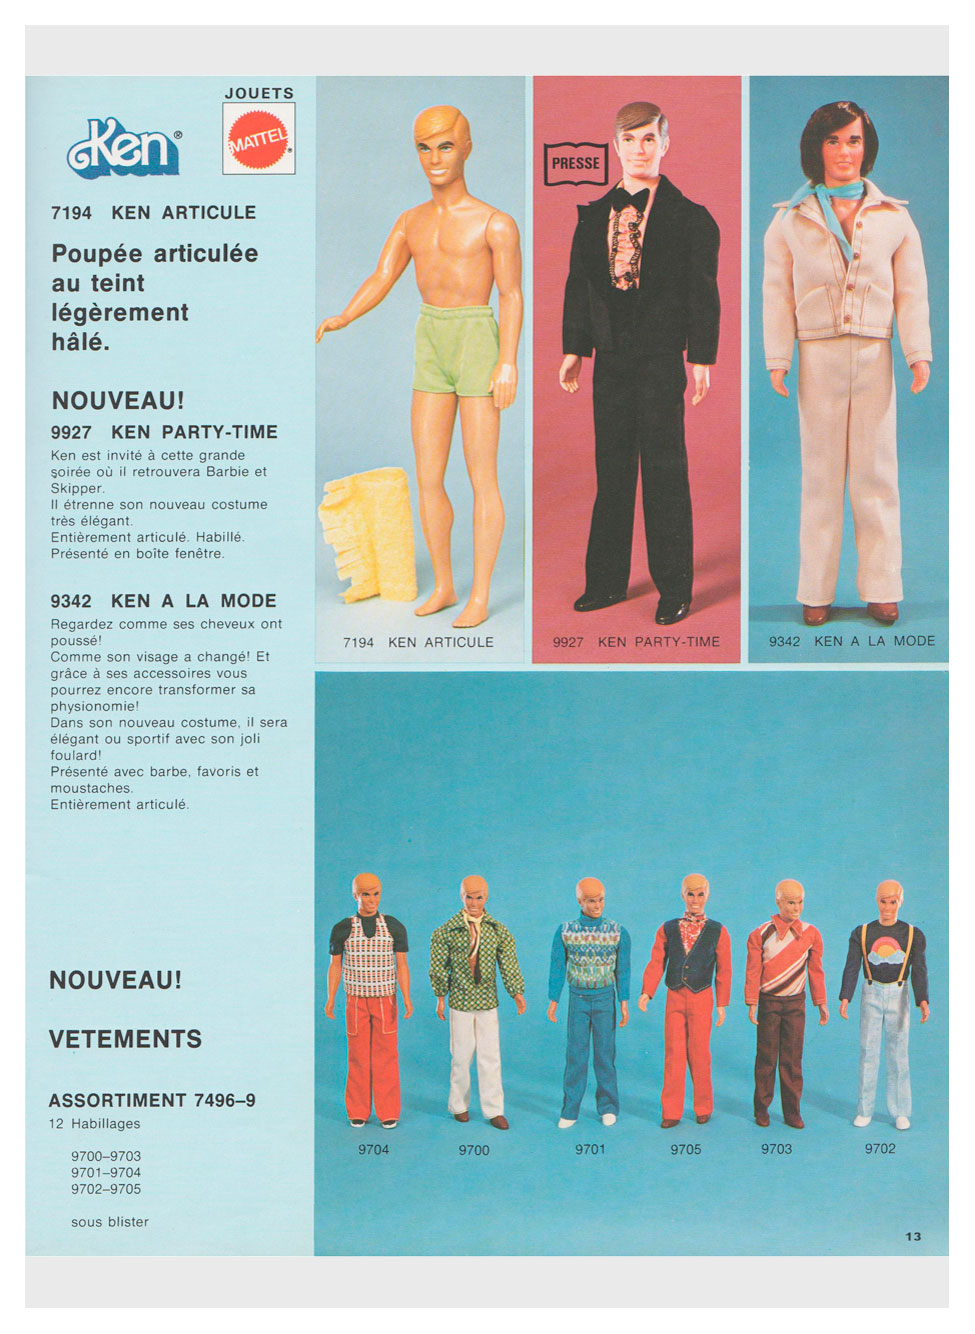 From 1977 French Mattel Toy catalogue